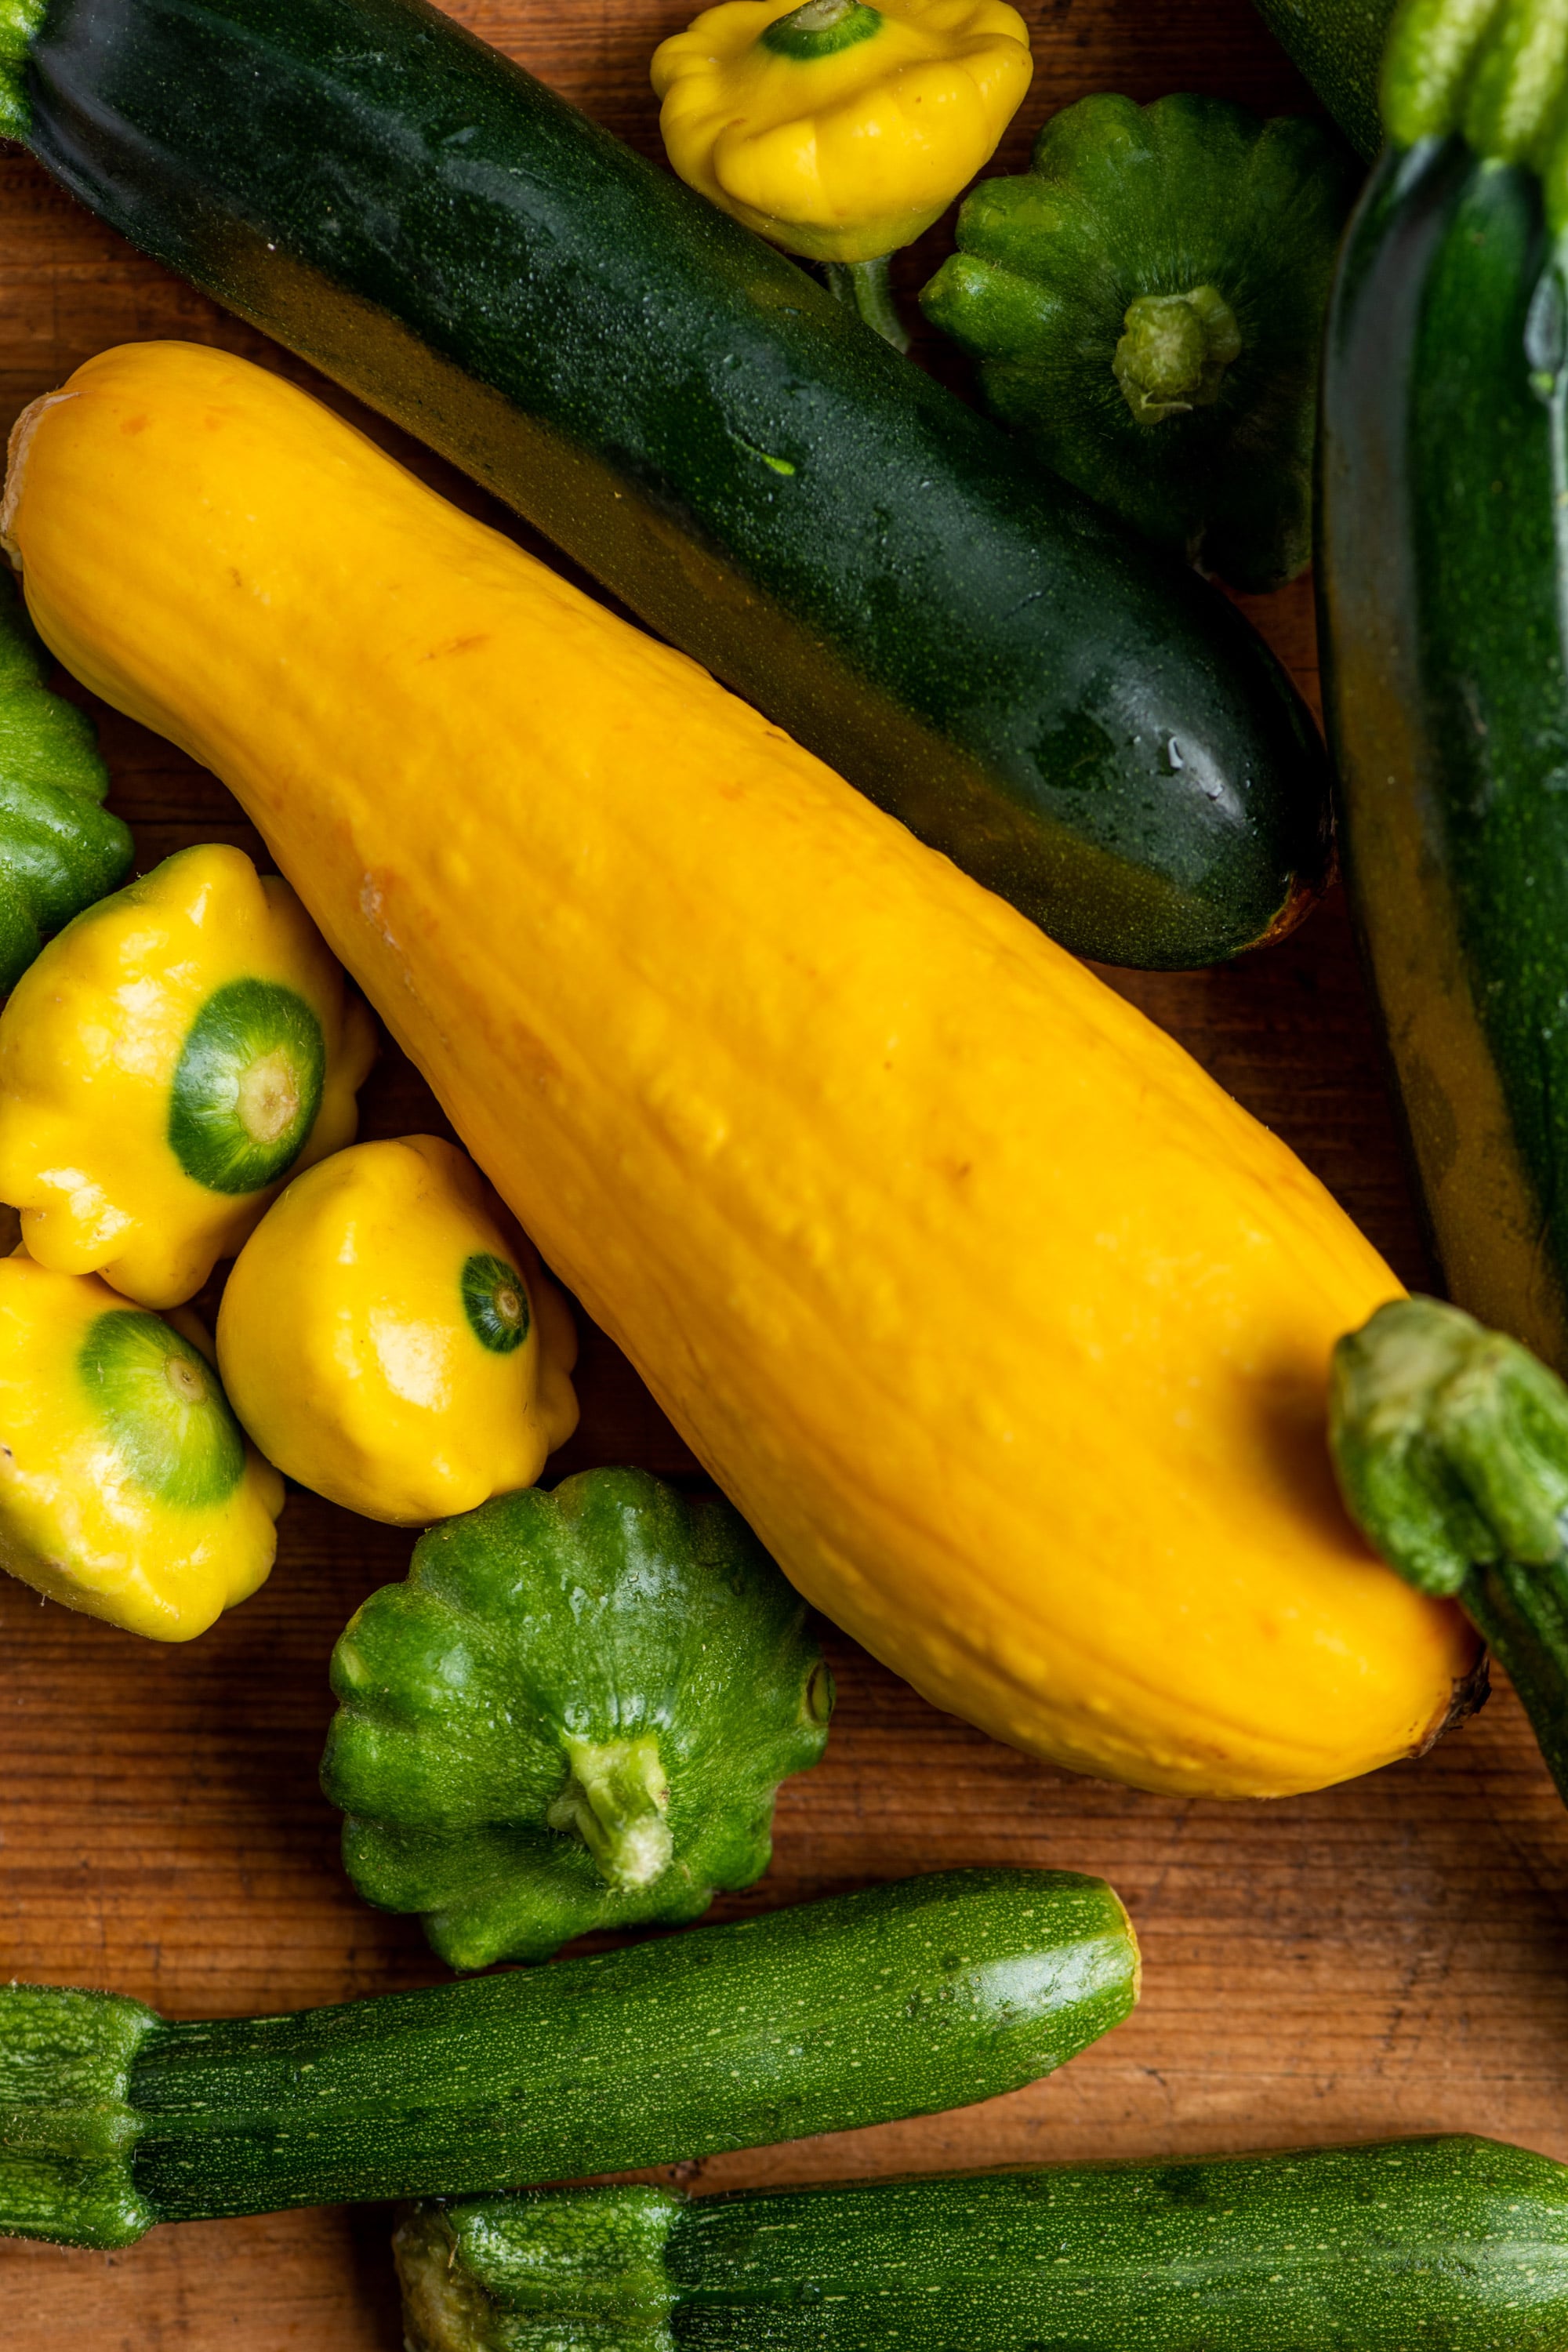 Fresh summer squash and zucchini of various sizes.